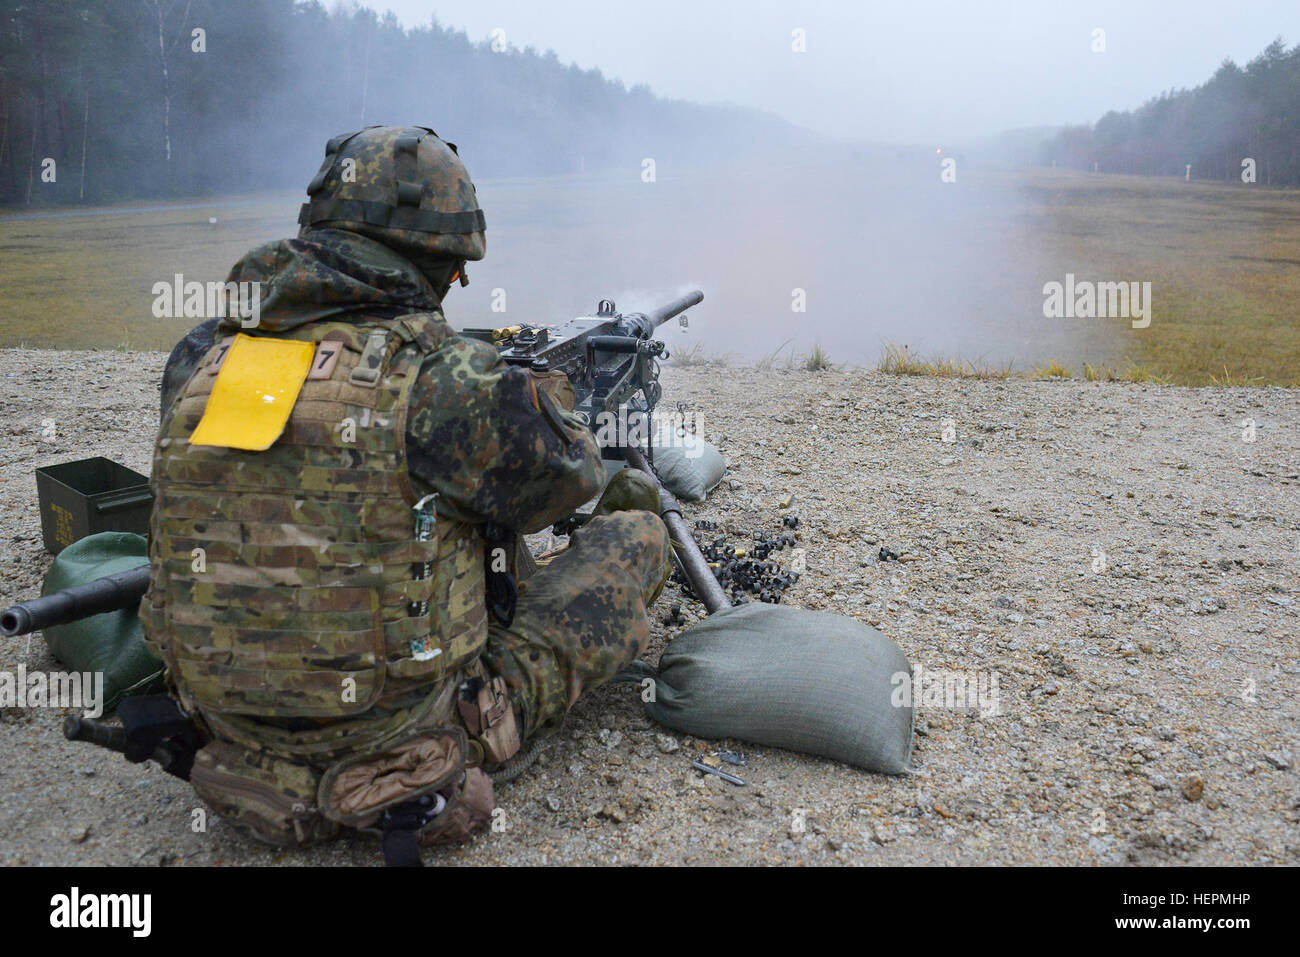 A German soldier fires a .50-caliber machine gun during a familiarization training on U.S. weapons at the 7th Army Joint Multinational Training Command Grafenwoehr Training Area, Germany, Dec. 9, 2015. (U.S. Army photo by Visual Information Specialist Gertrud Zach/released) CATC trains German soldiers on US weapons 151209-A-HE539-0376 Stock Photo